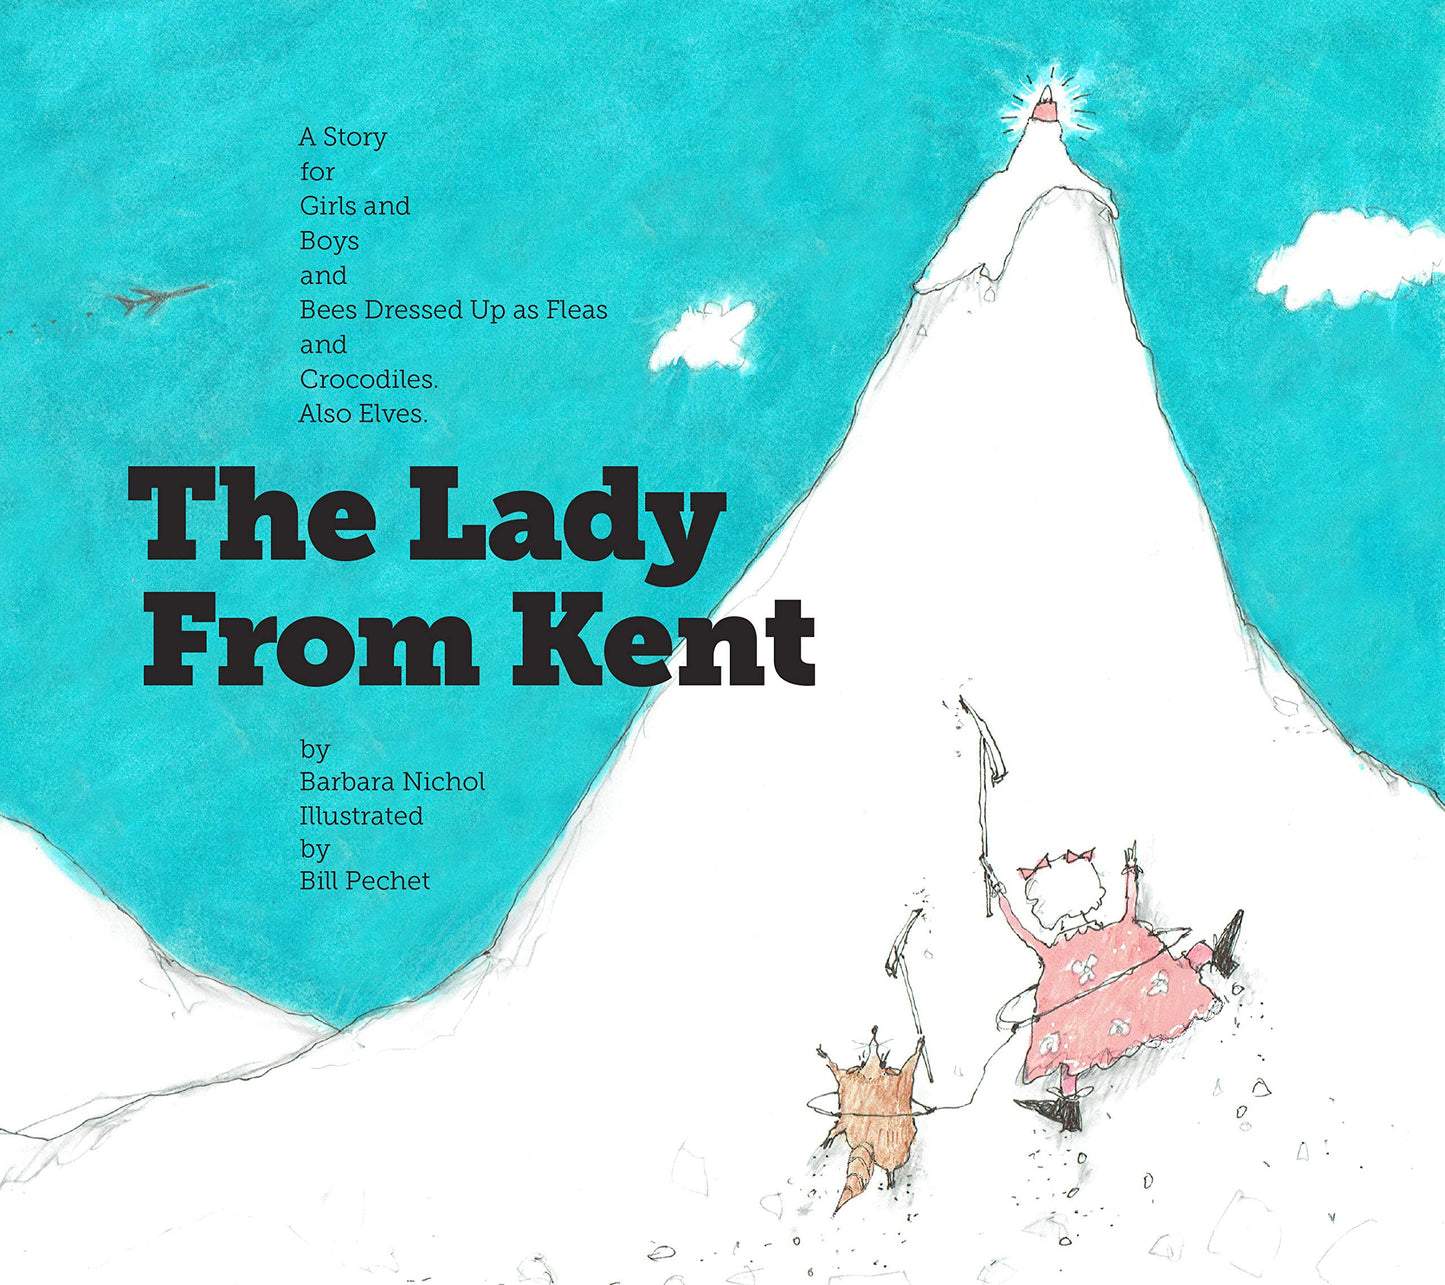 The Lady From Kent by Barbara Nichol